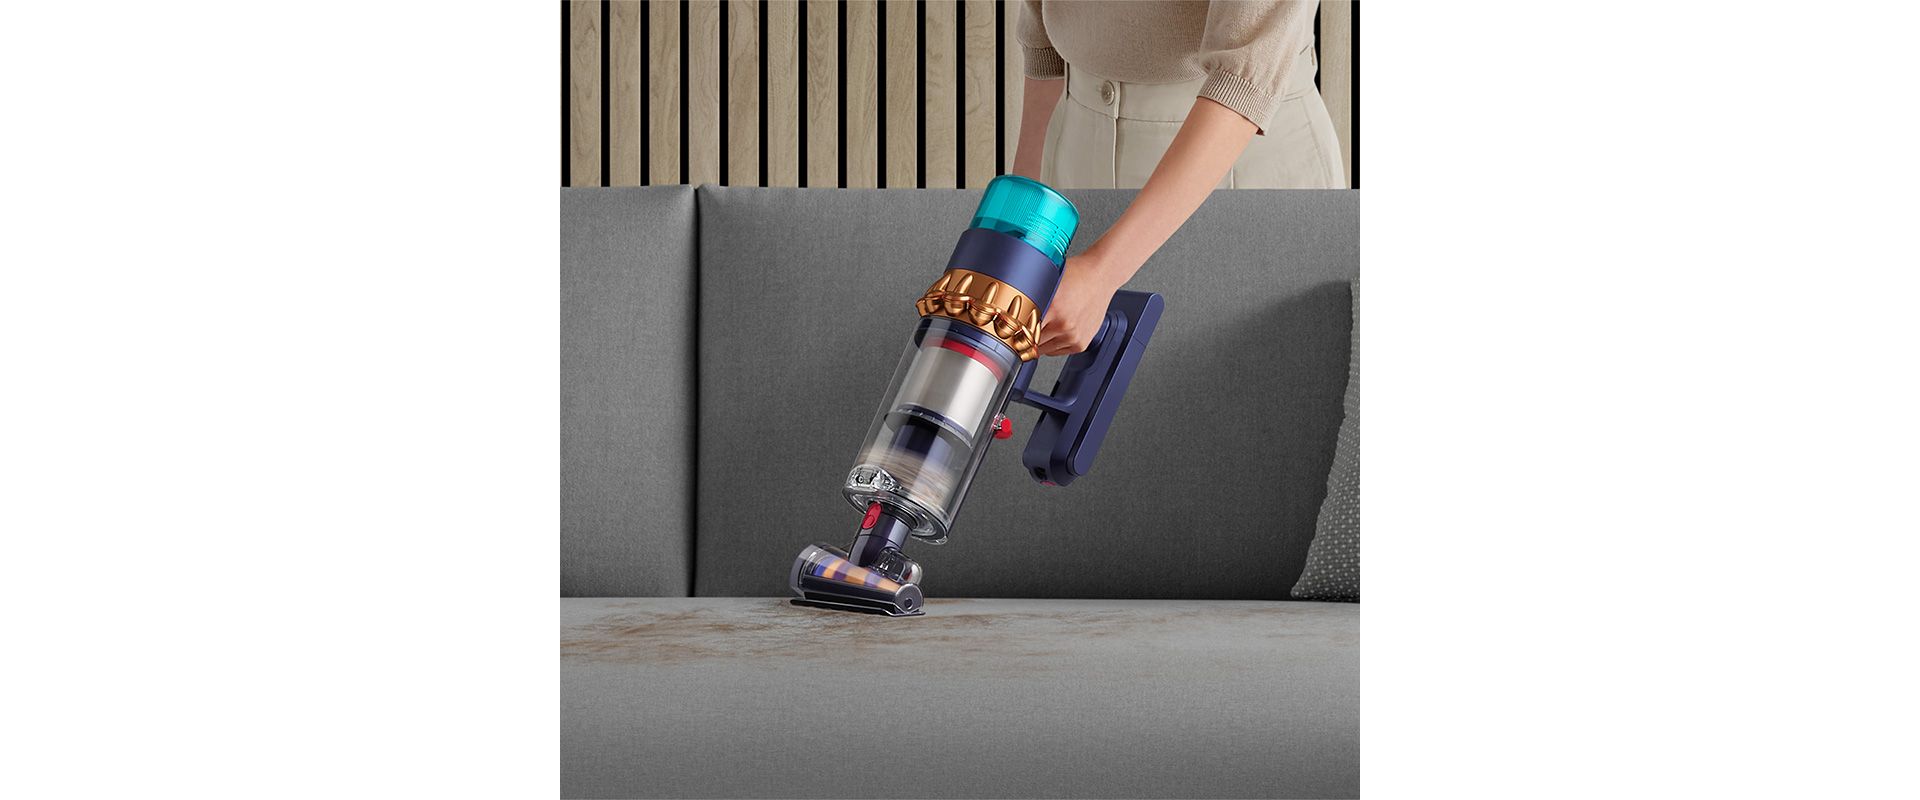 Woman vacuuming pet hair from a sofa, with the Dyson Hair screw tool.